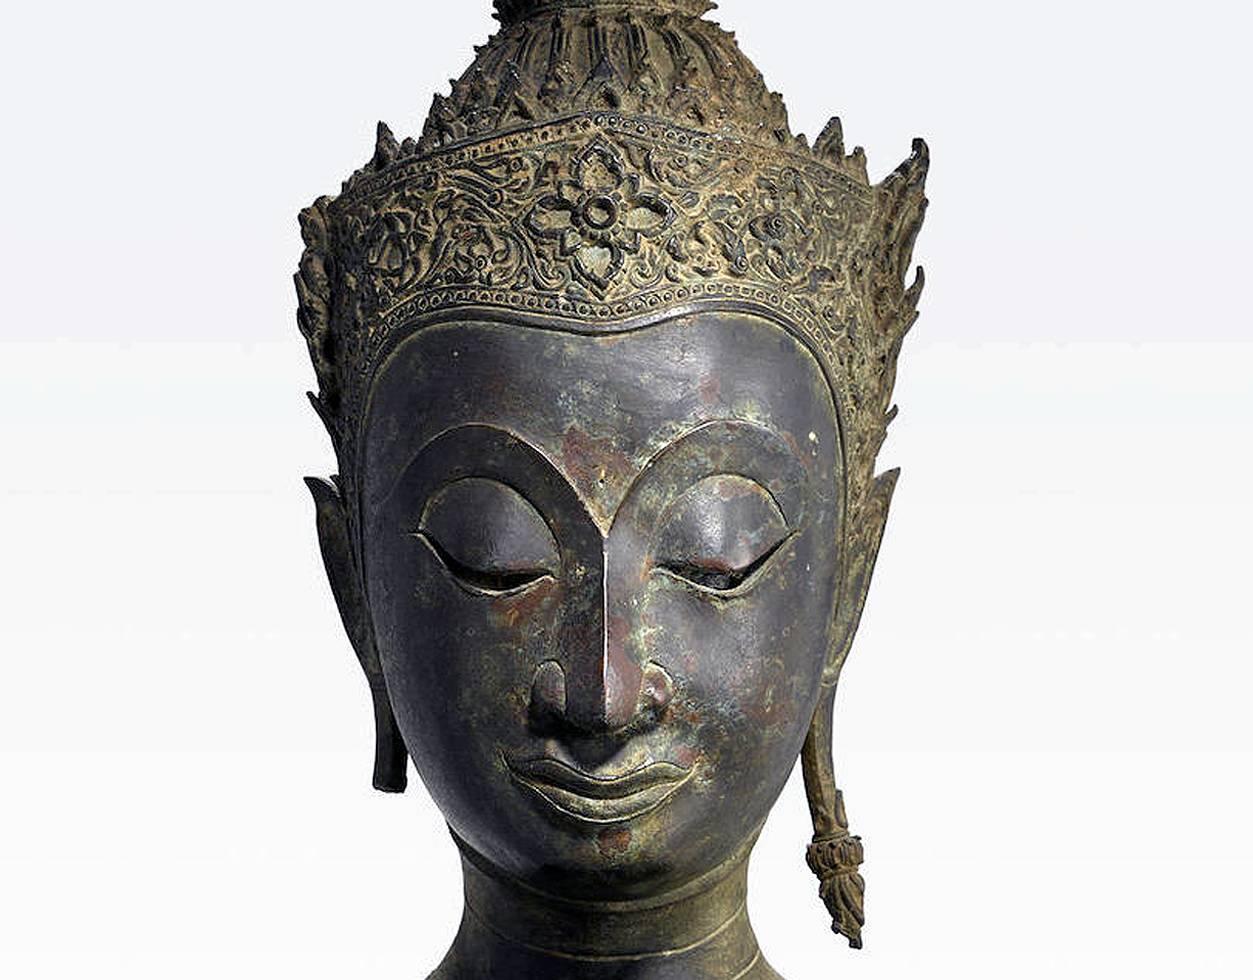 A Thai bronze Buddha head of Ayutthaya Period (1350 to 1767 A.D) on a fitted wood base. The style of this particular Buddha image is dated to the later Ayutthaya period circa 18th century, when it became common to depict Buddha with a lavish royal